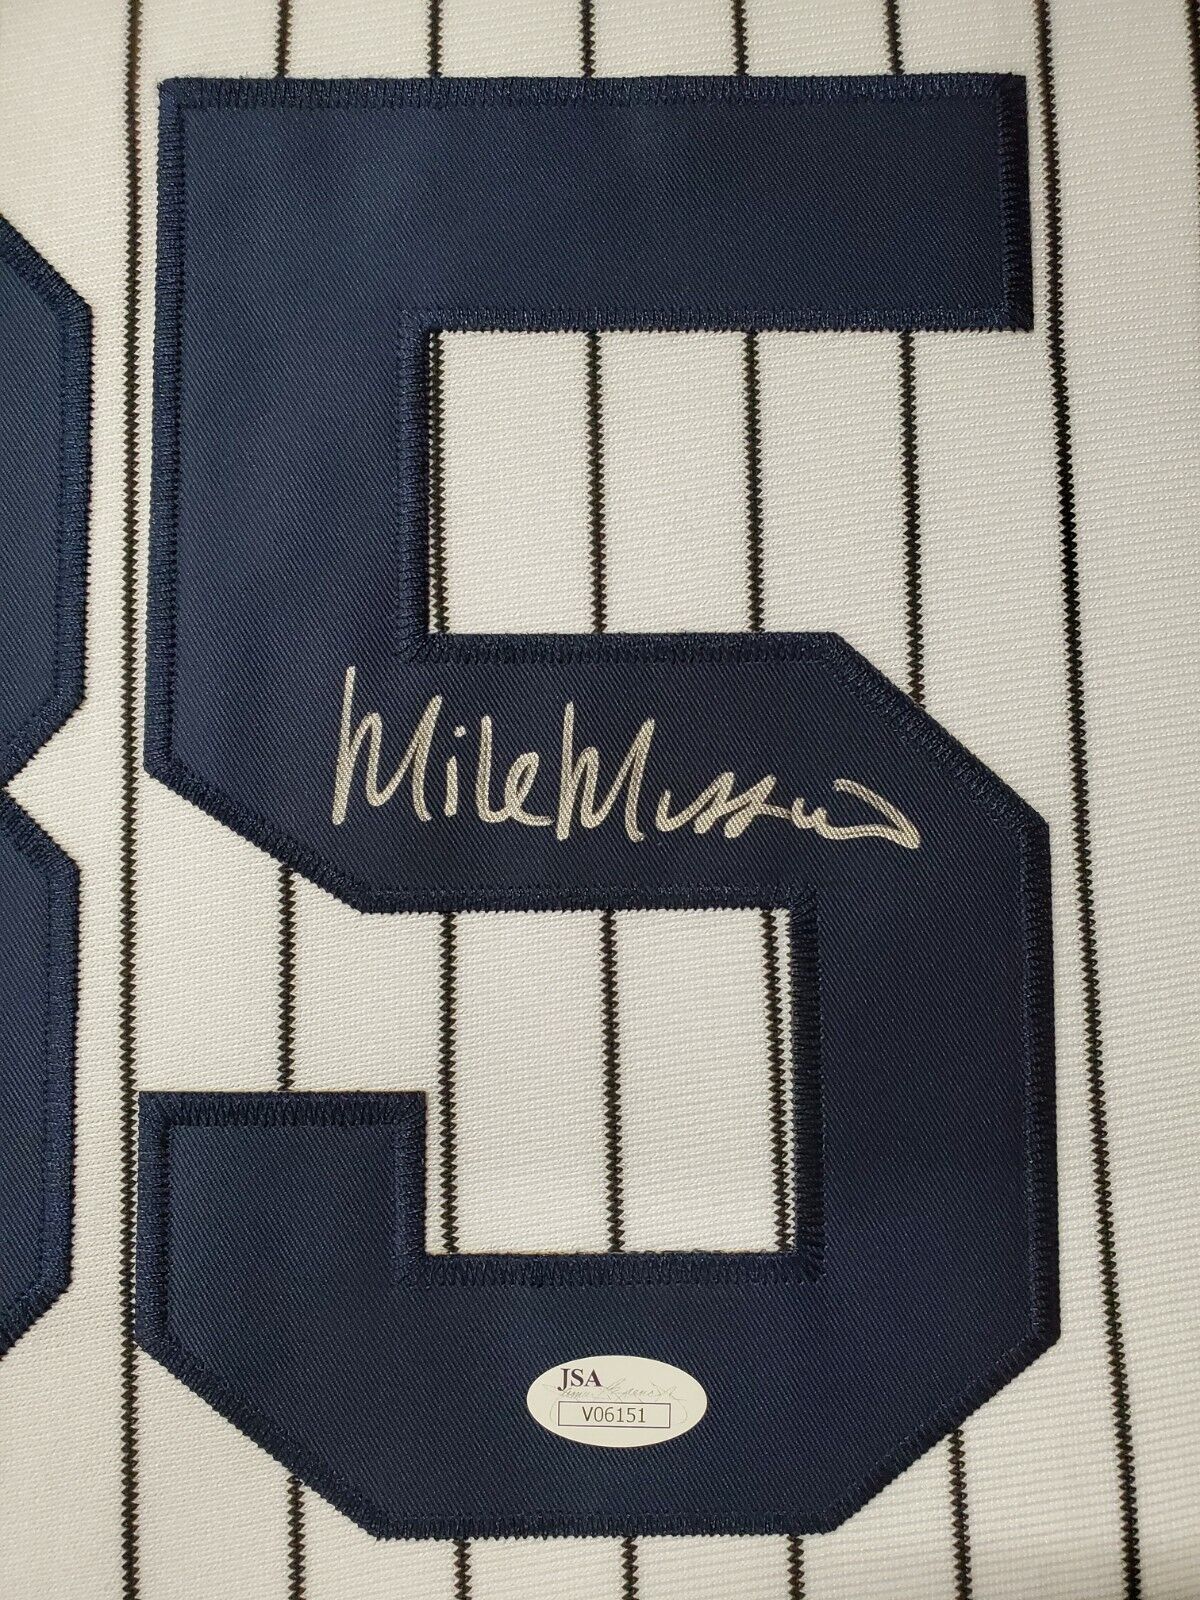 MVP Authentics Framed New York Yankees Mike Mussina Autographed Signed Jersey Jsa Coa 539.10 sports jersey framing , jersey framing